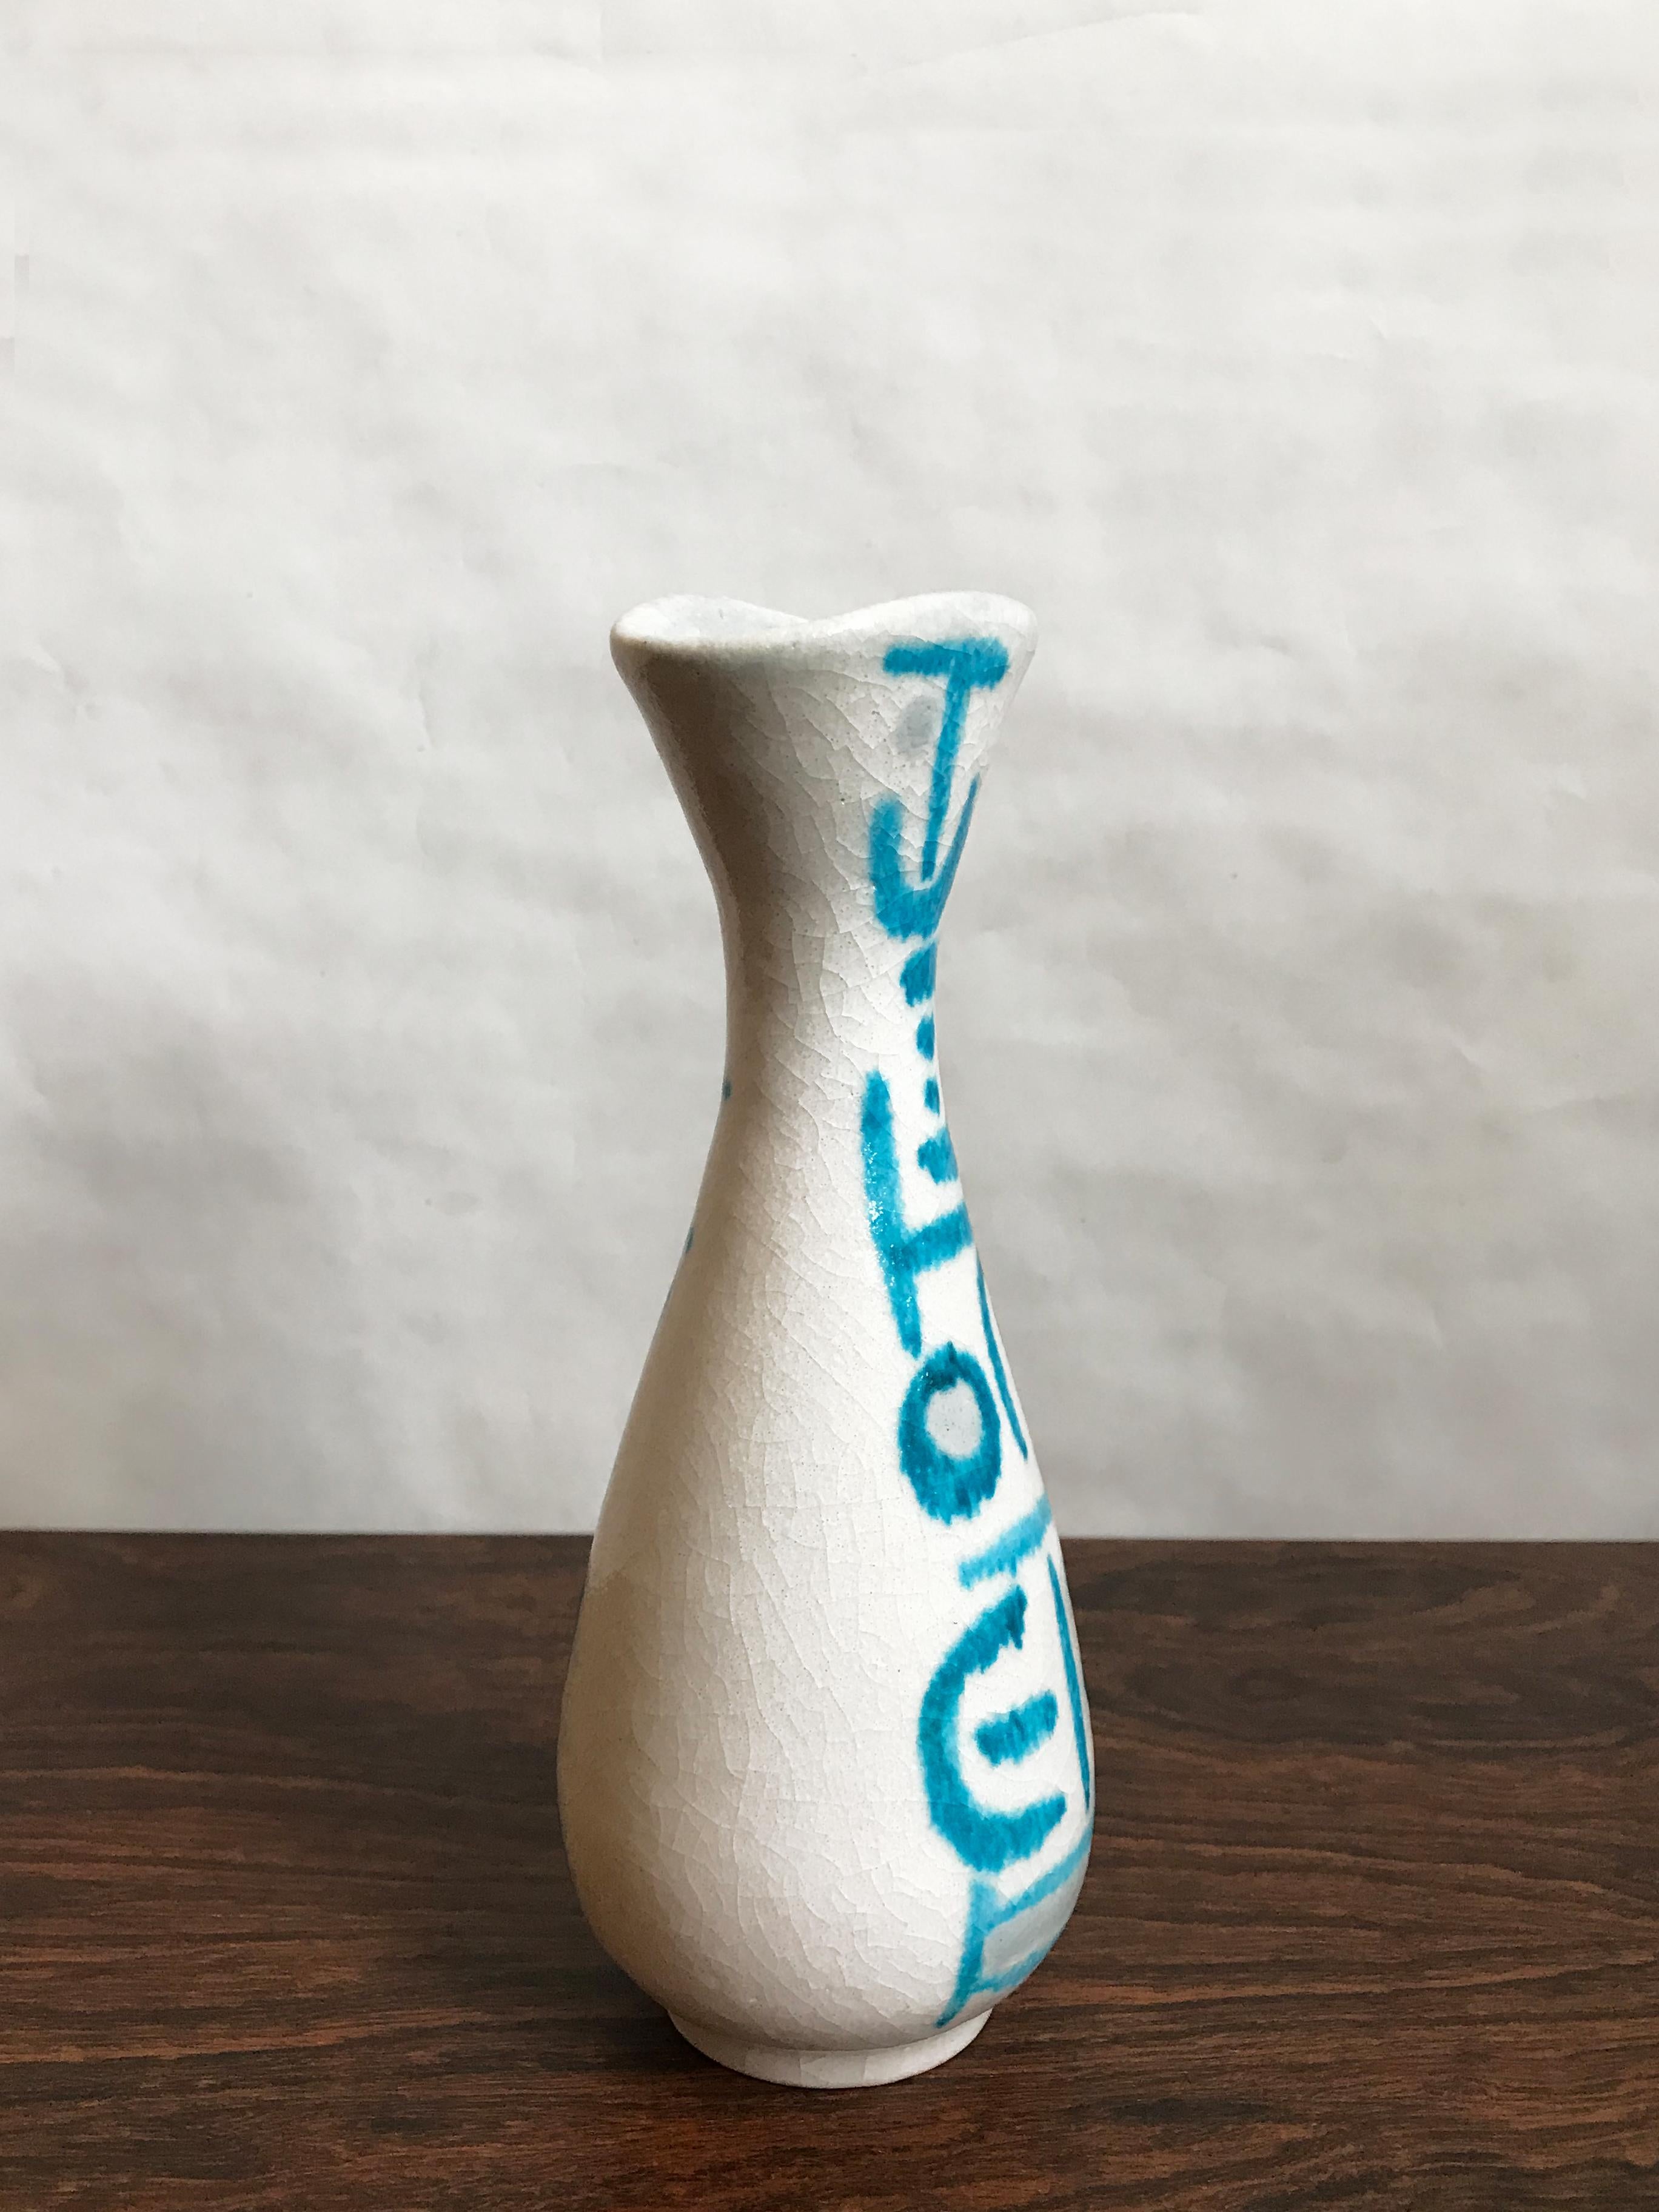 Italian midcentury ceramic glazed vase designed by Italian artist Guido Gambone decorated with an abstract drawing and signature of the artist under the base, 1950s.

Please note that the item is original of the period and this shows normal signs